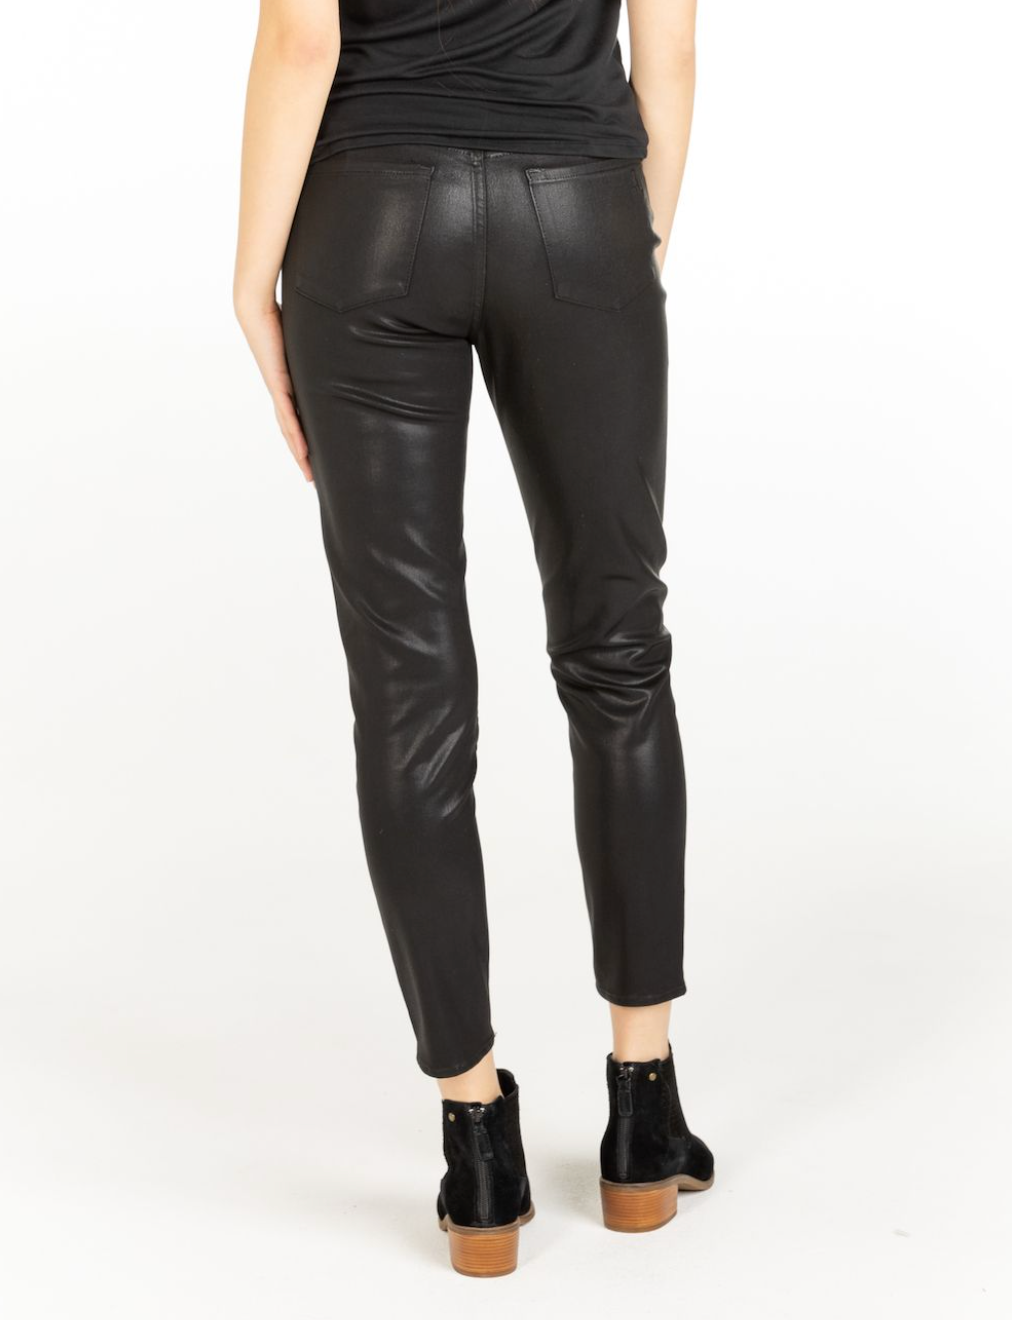 Articles Of Society Heather Coated Black Skinny